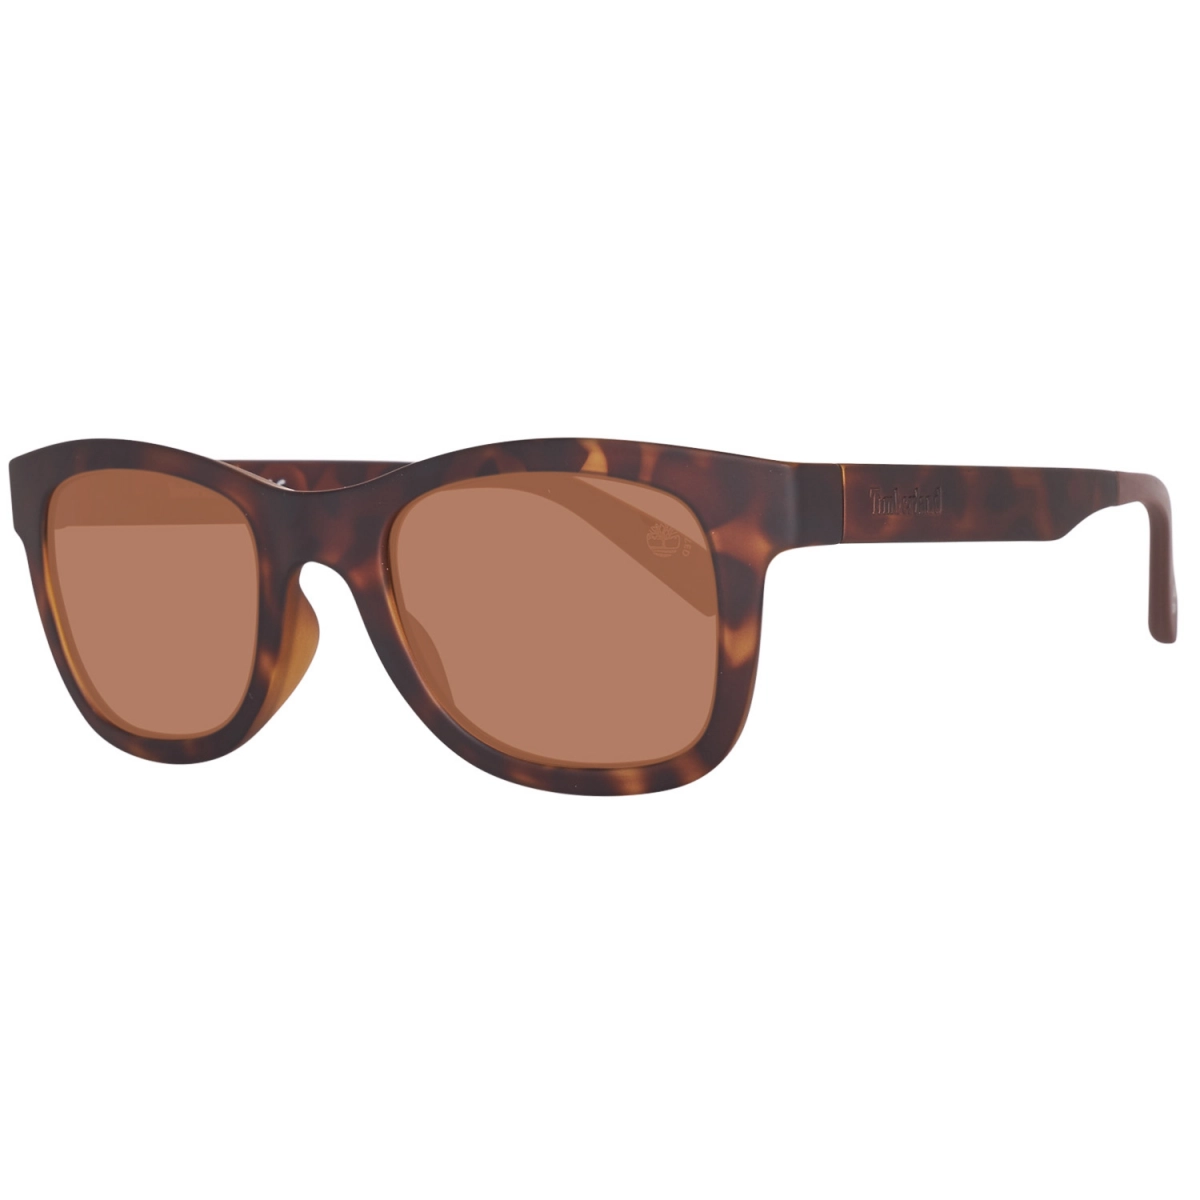 LUNETTES POUR HOMME TIMBERLAND TB9080-5052H